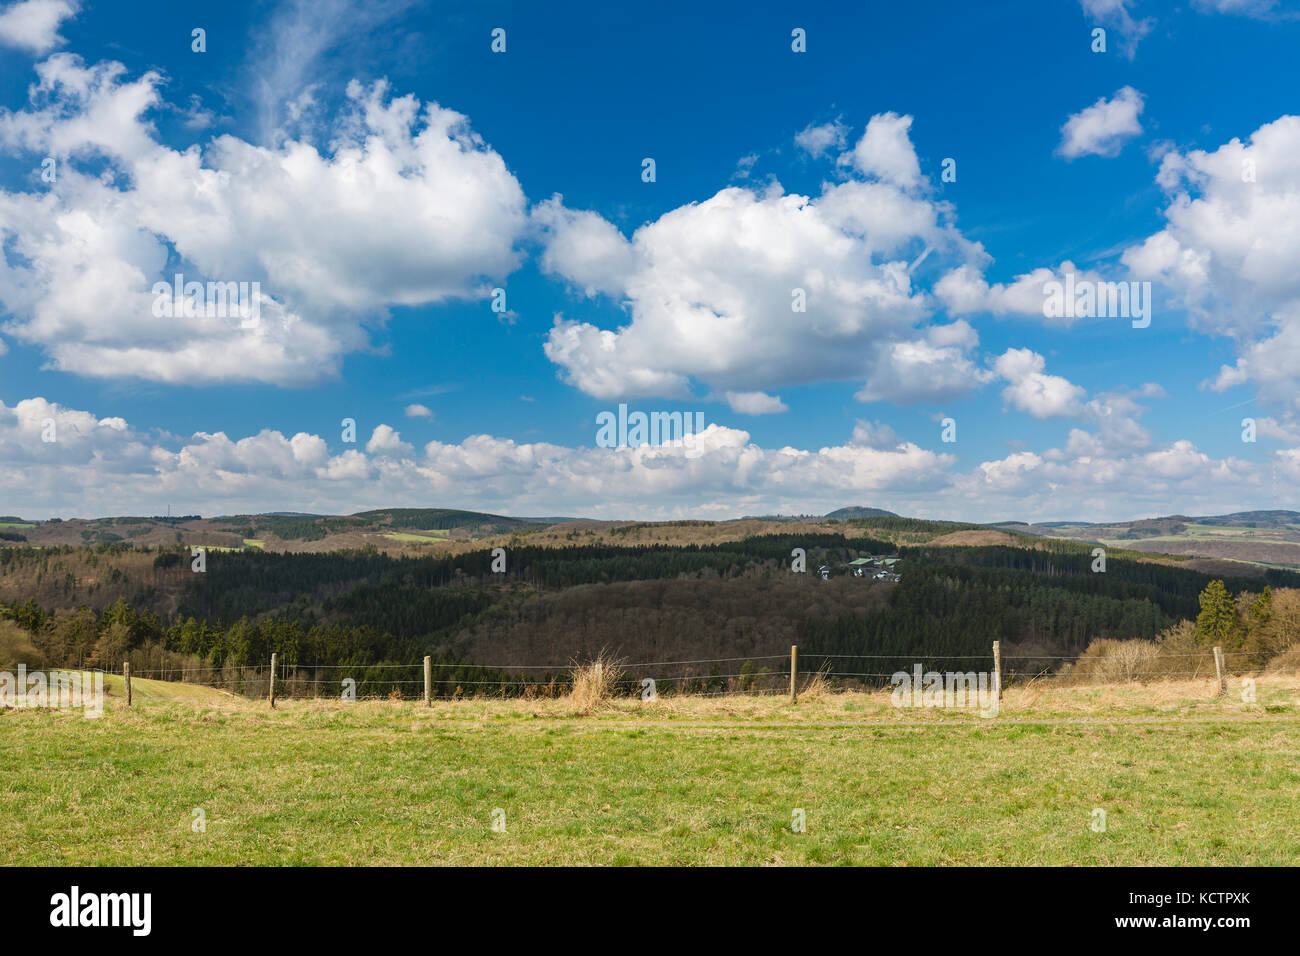 View over the southern Eifel hills near Daun, Germany with blue sky. Stock Photo